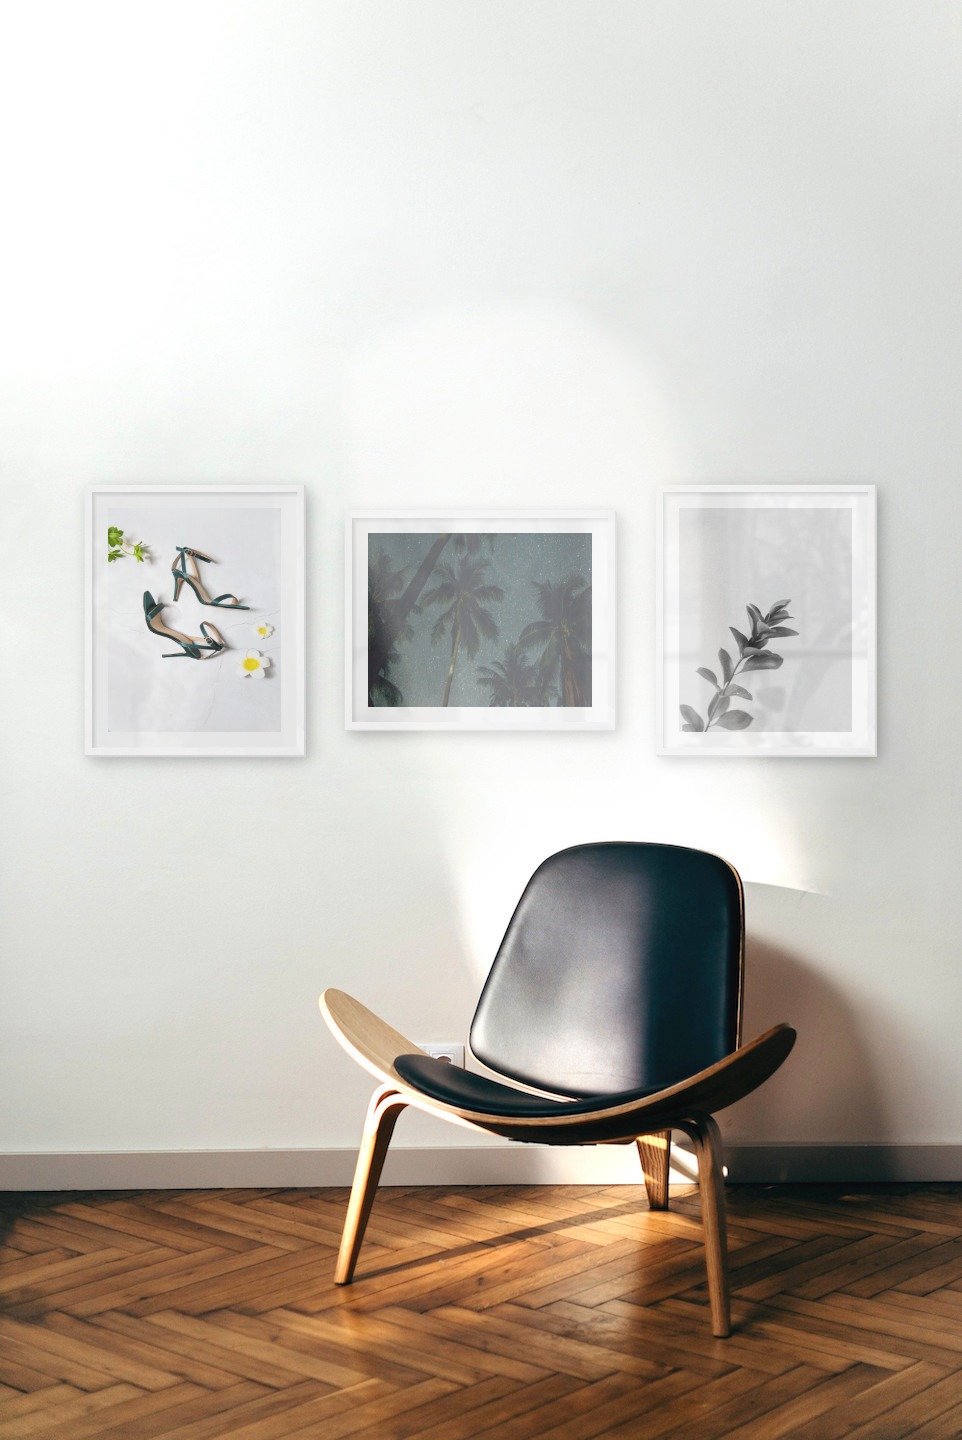 Gallery wall with picture frames in white in sizes 40x50 with prints "Heels", "Palm trees and night sky" and "Twig"